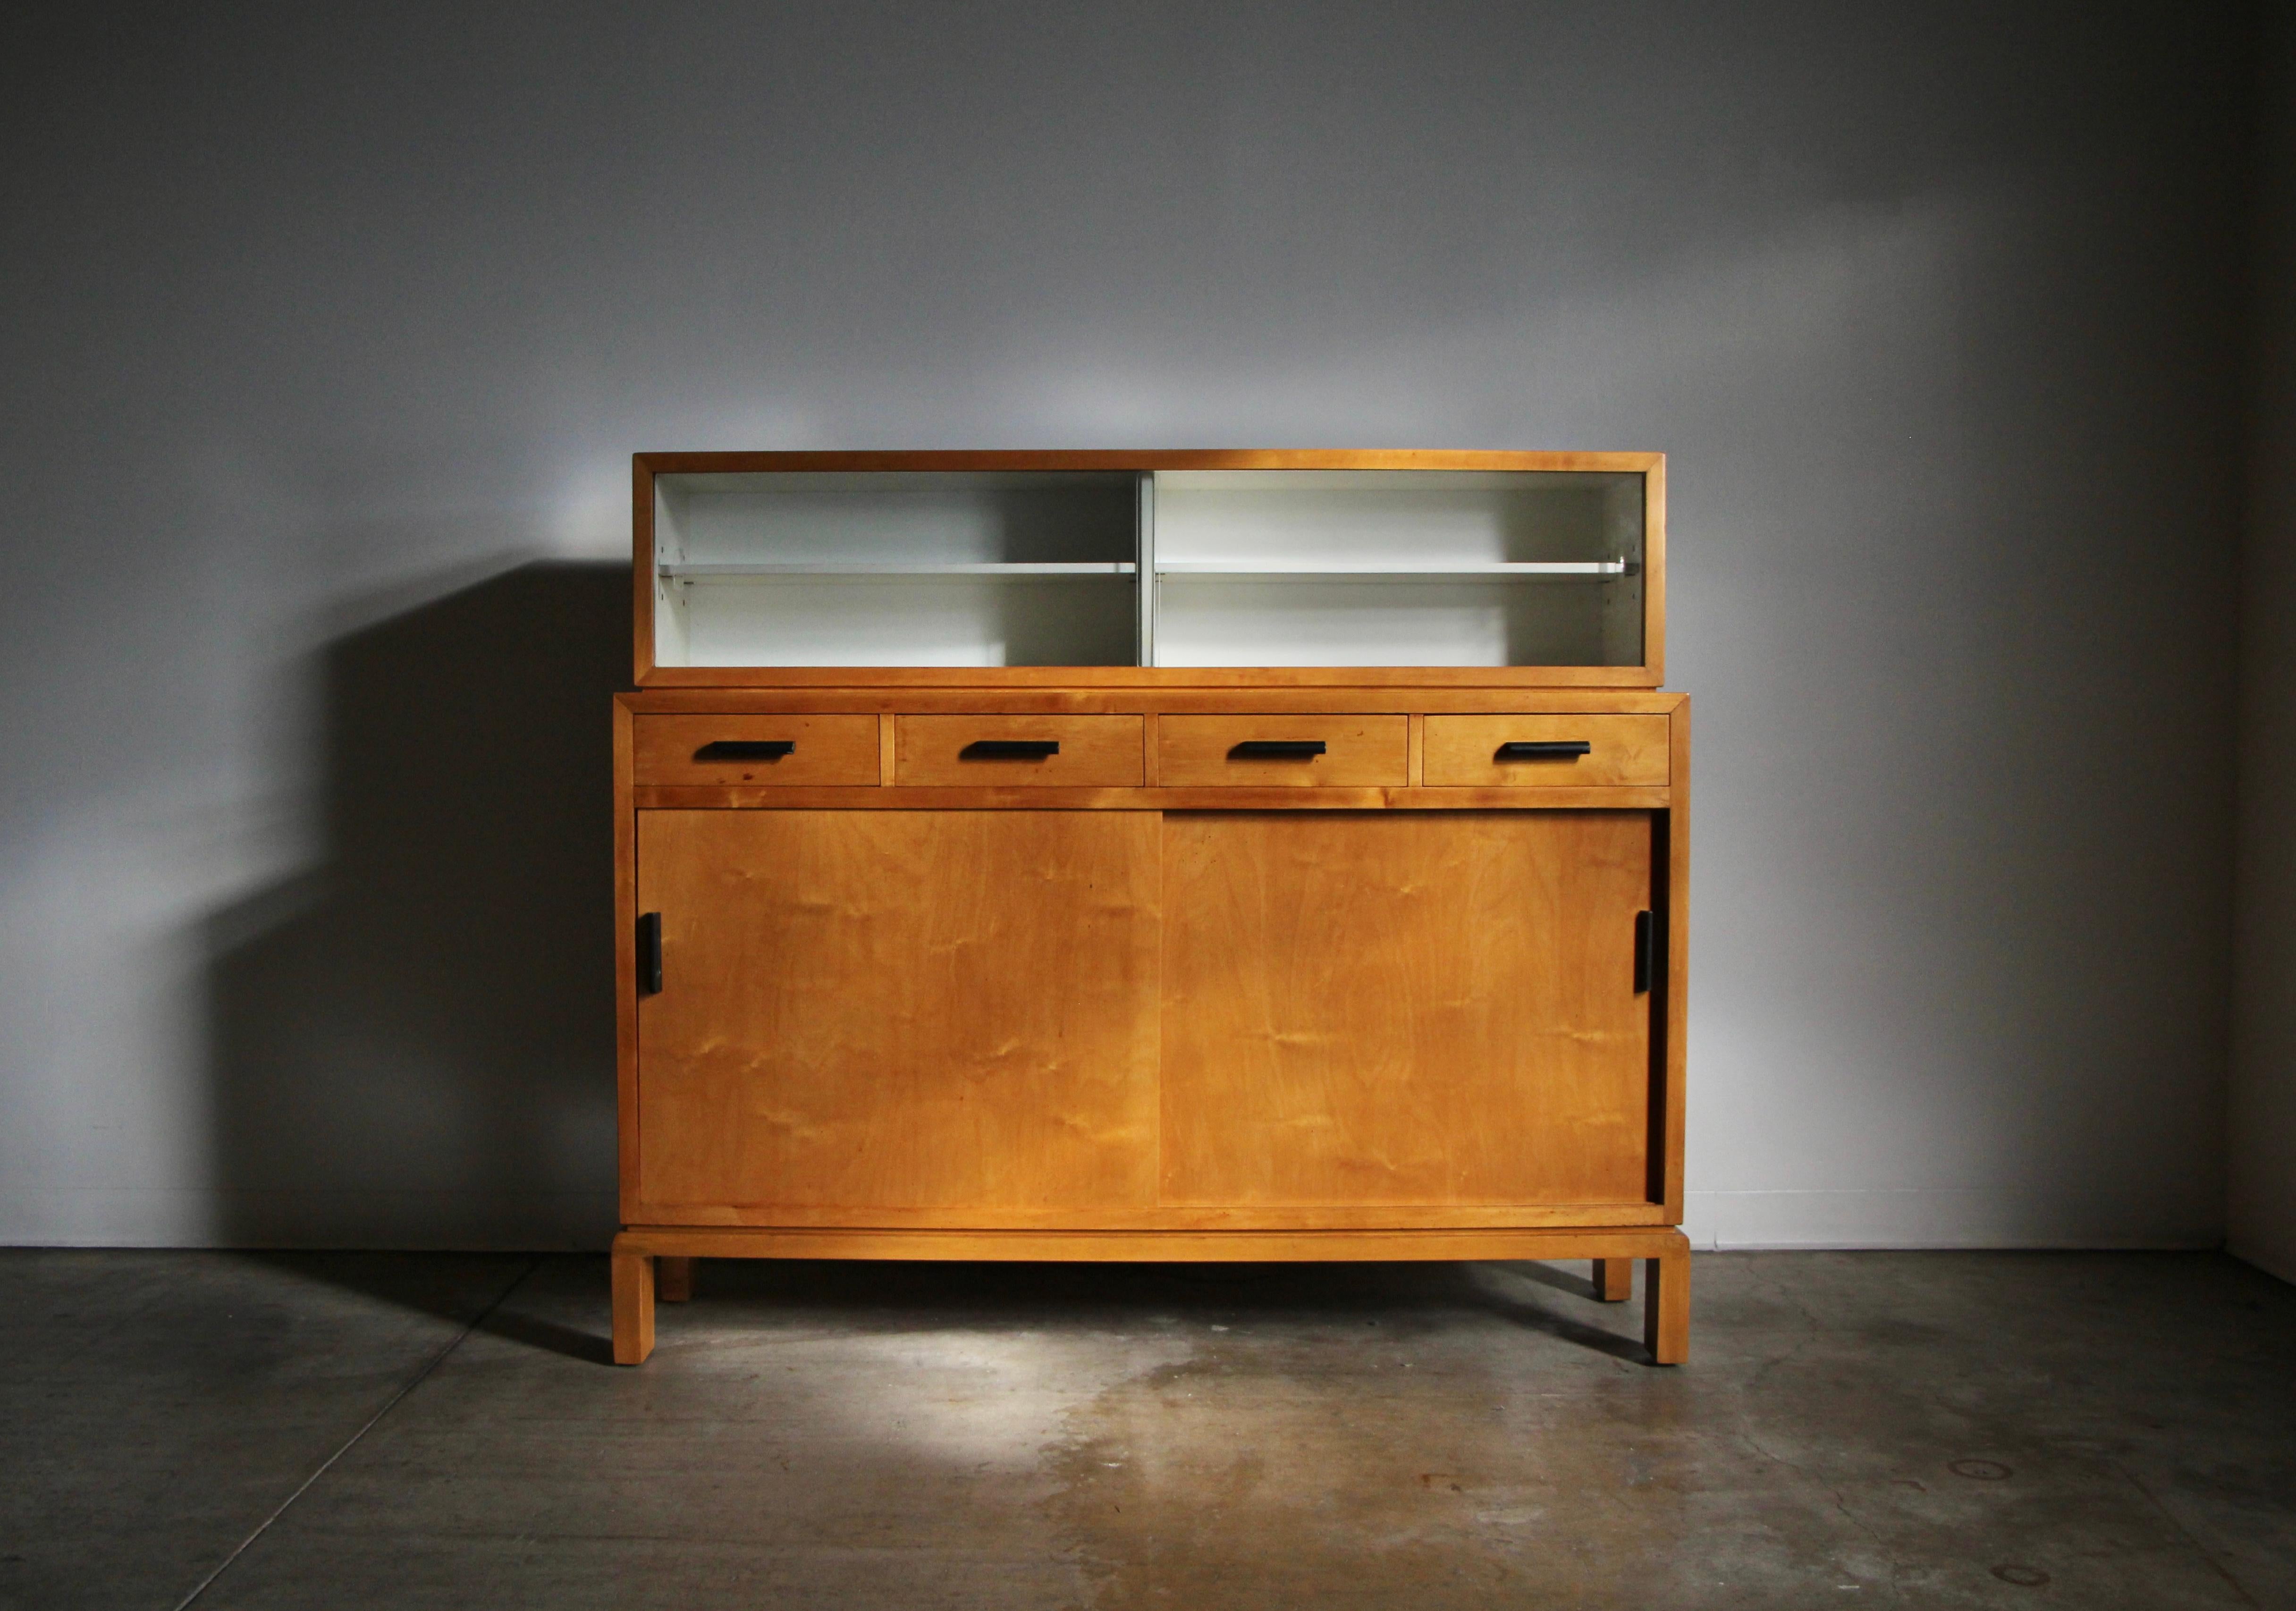 Aino Aalto rare two-section cabinet, Model 810 for Oy Huonekalu-ja Rakennustyötehdas Ab. Cabinet is constructed of birch and birch plywood with original glass sliding doors. Lower section with drawers and double doors. Top portion of cabinet can be